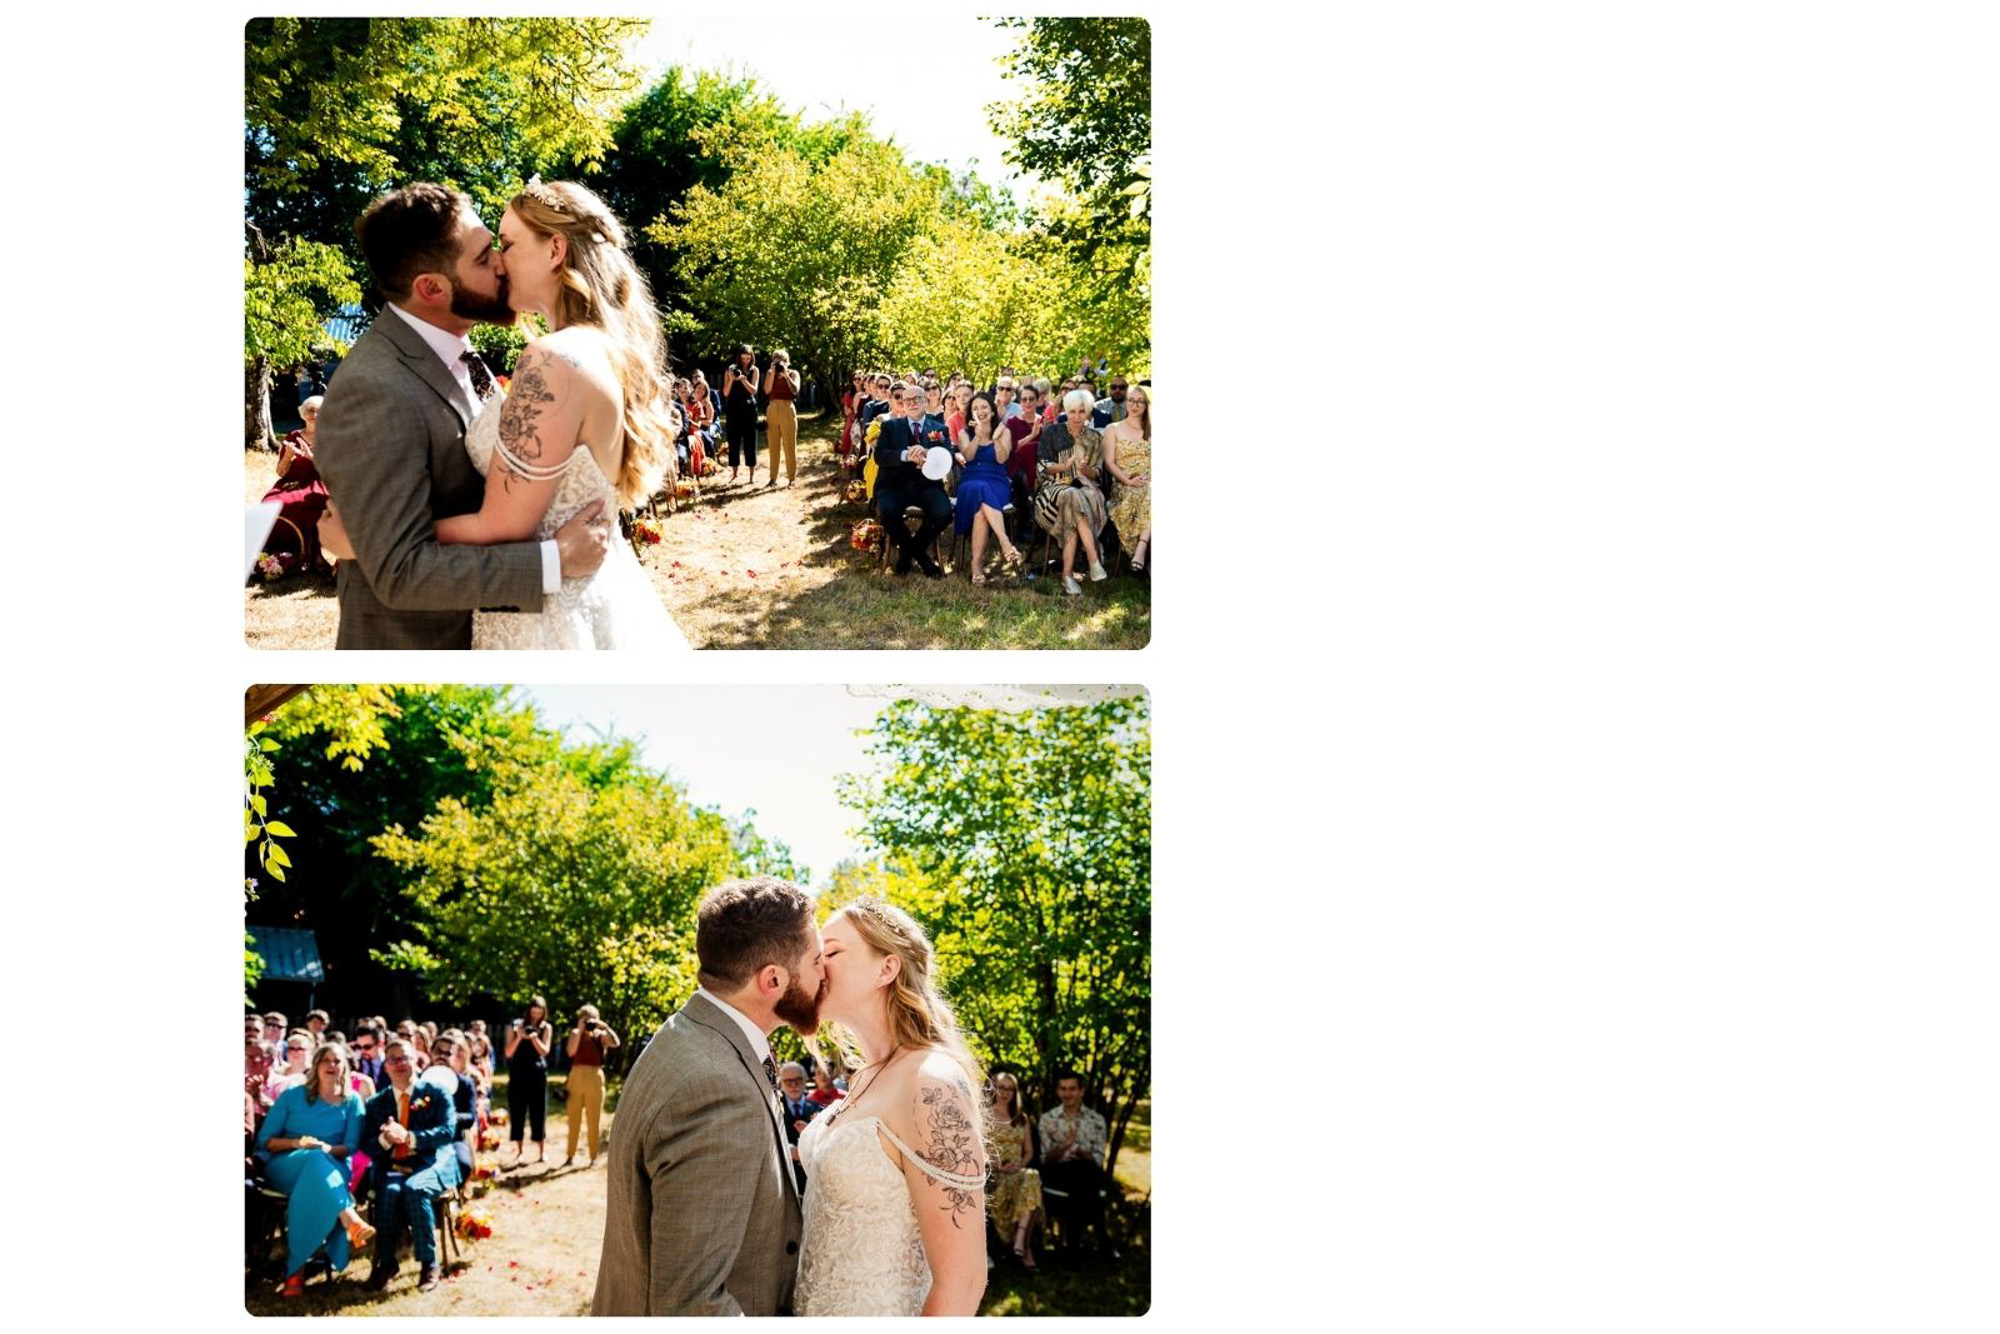 First kiss where photographer captures crowd reaction